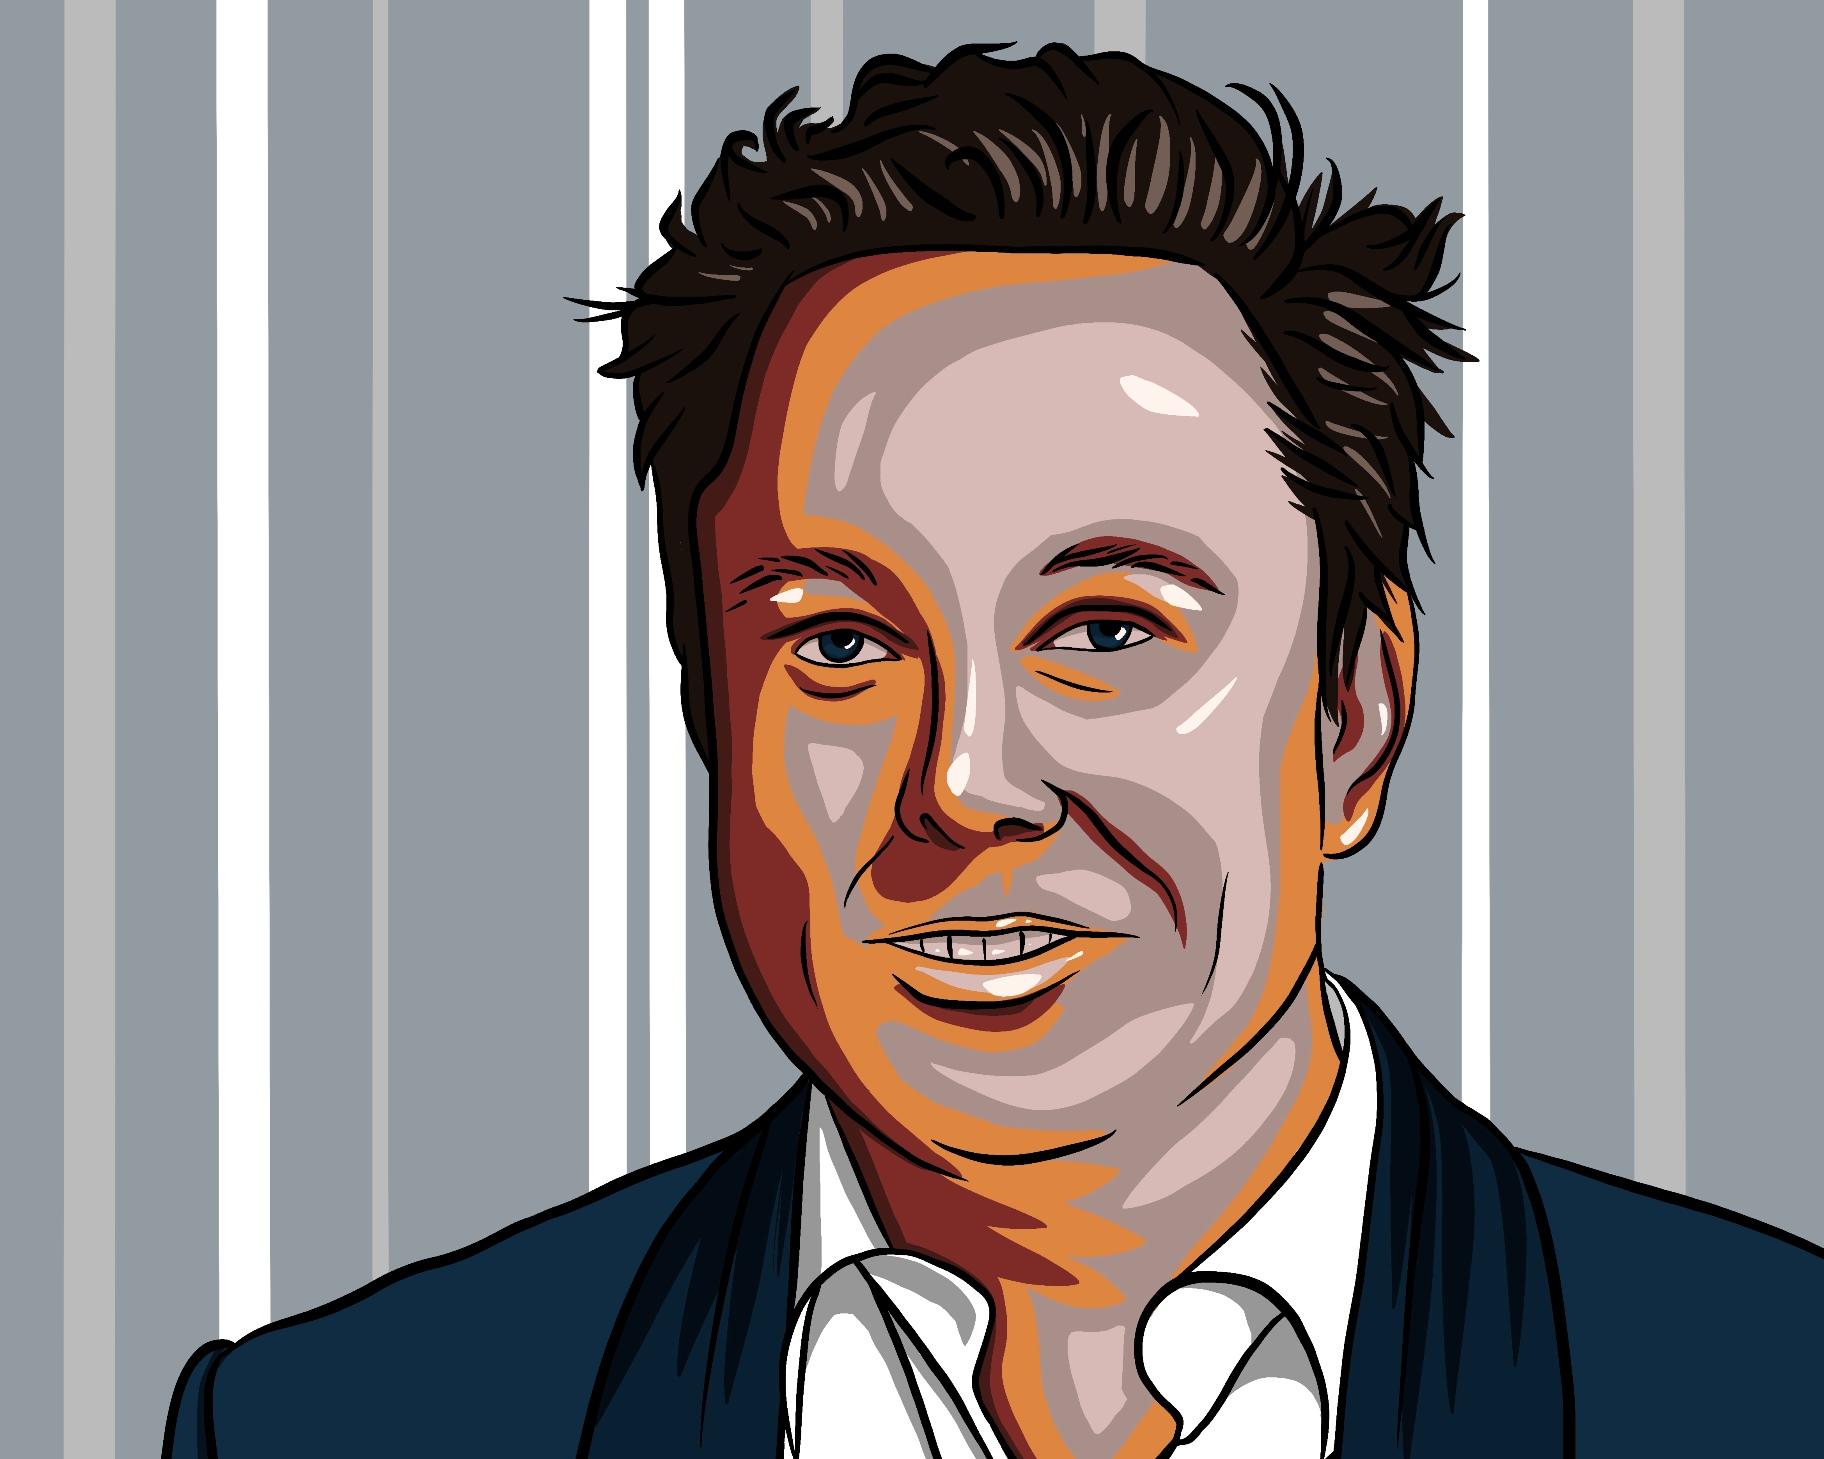 A digital painting in the form of pop art by Lily Bourne of Elon Musk showing the entrepreneur confidently wearing a s